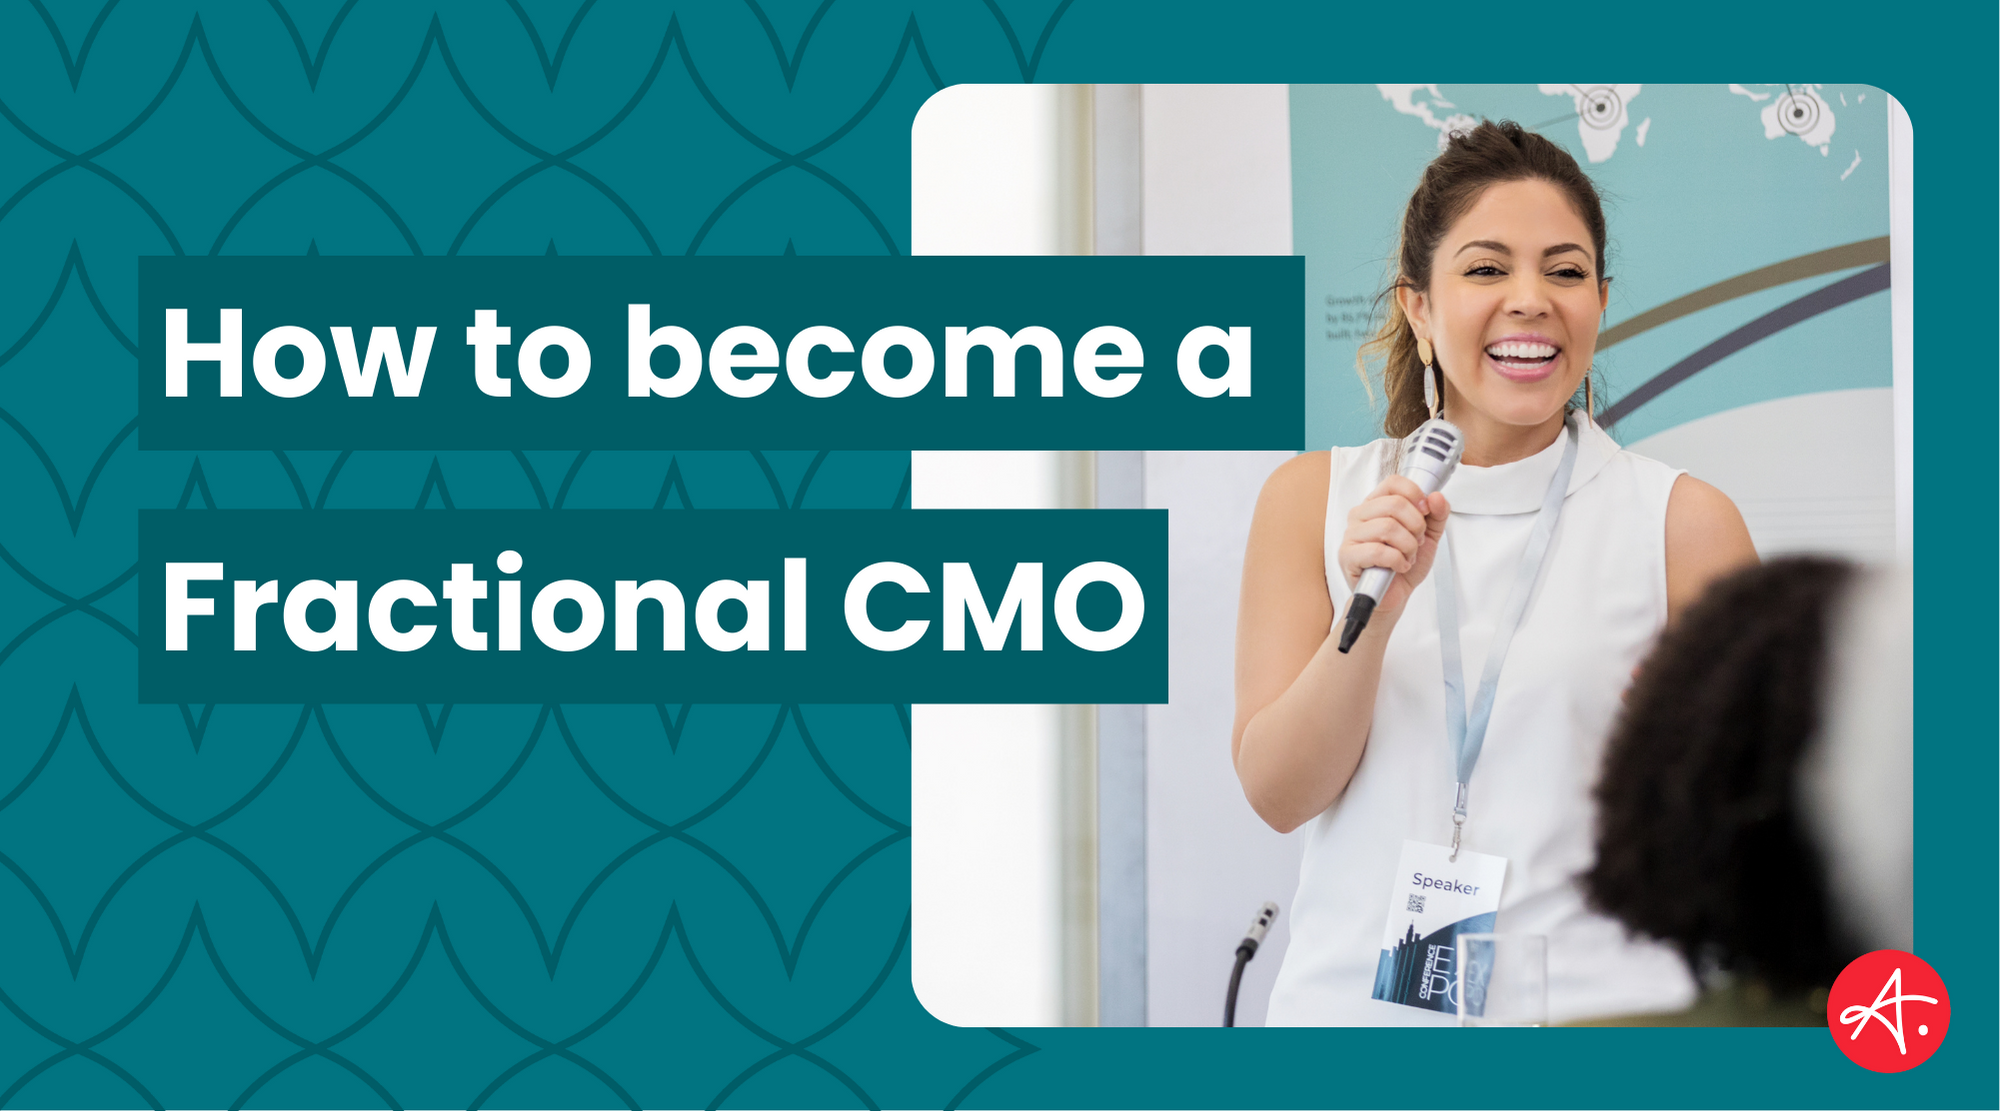 How to become a fractional CMO